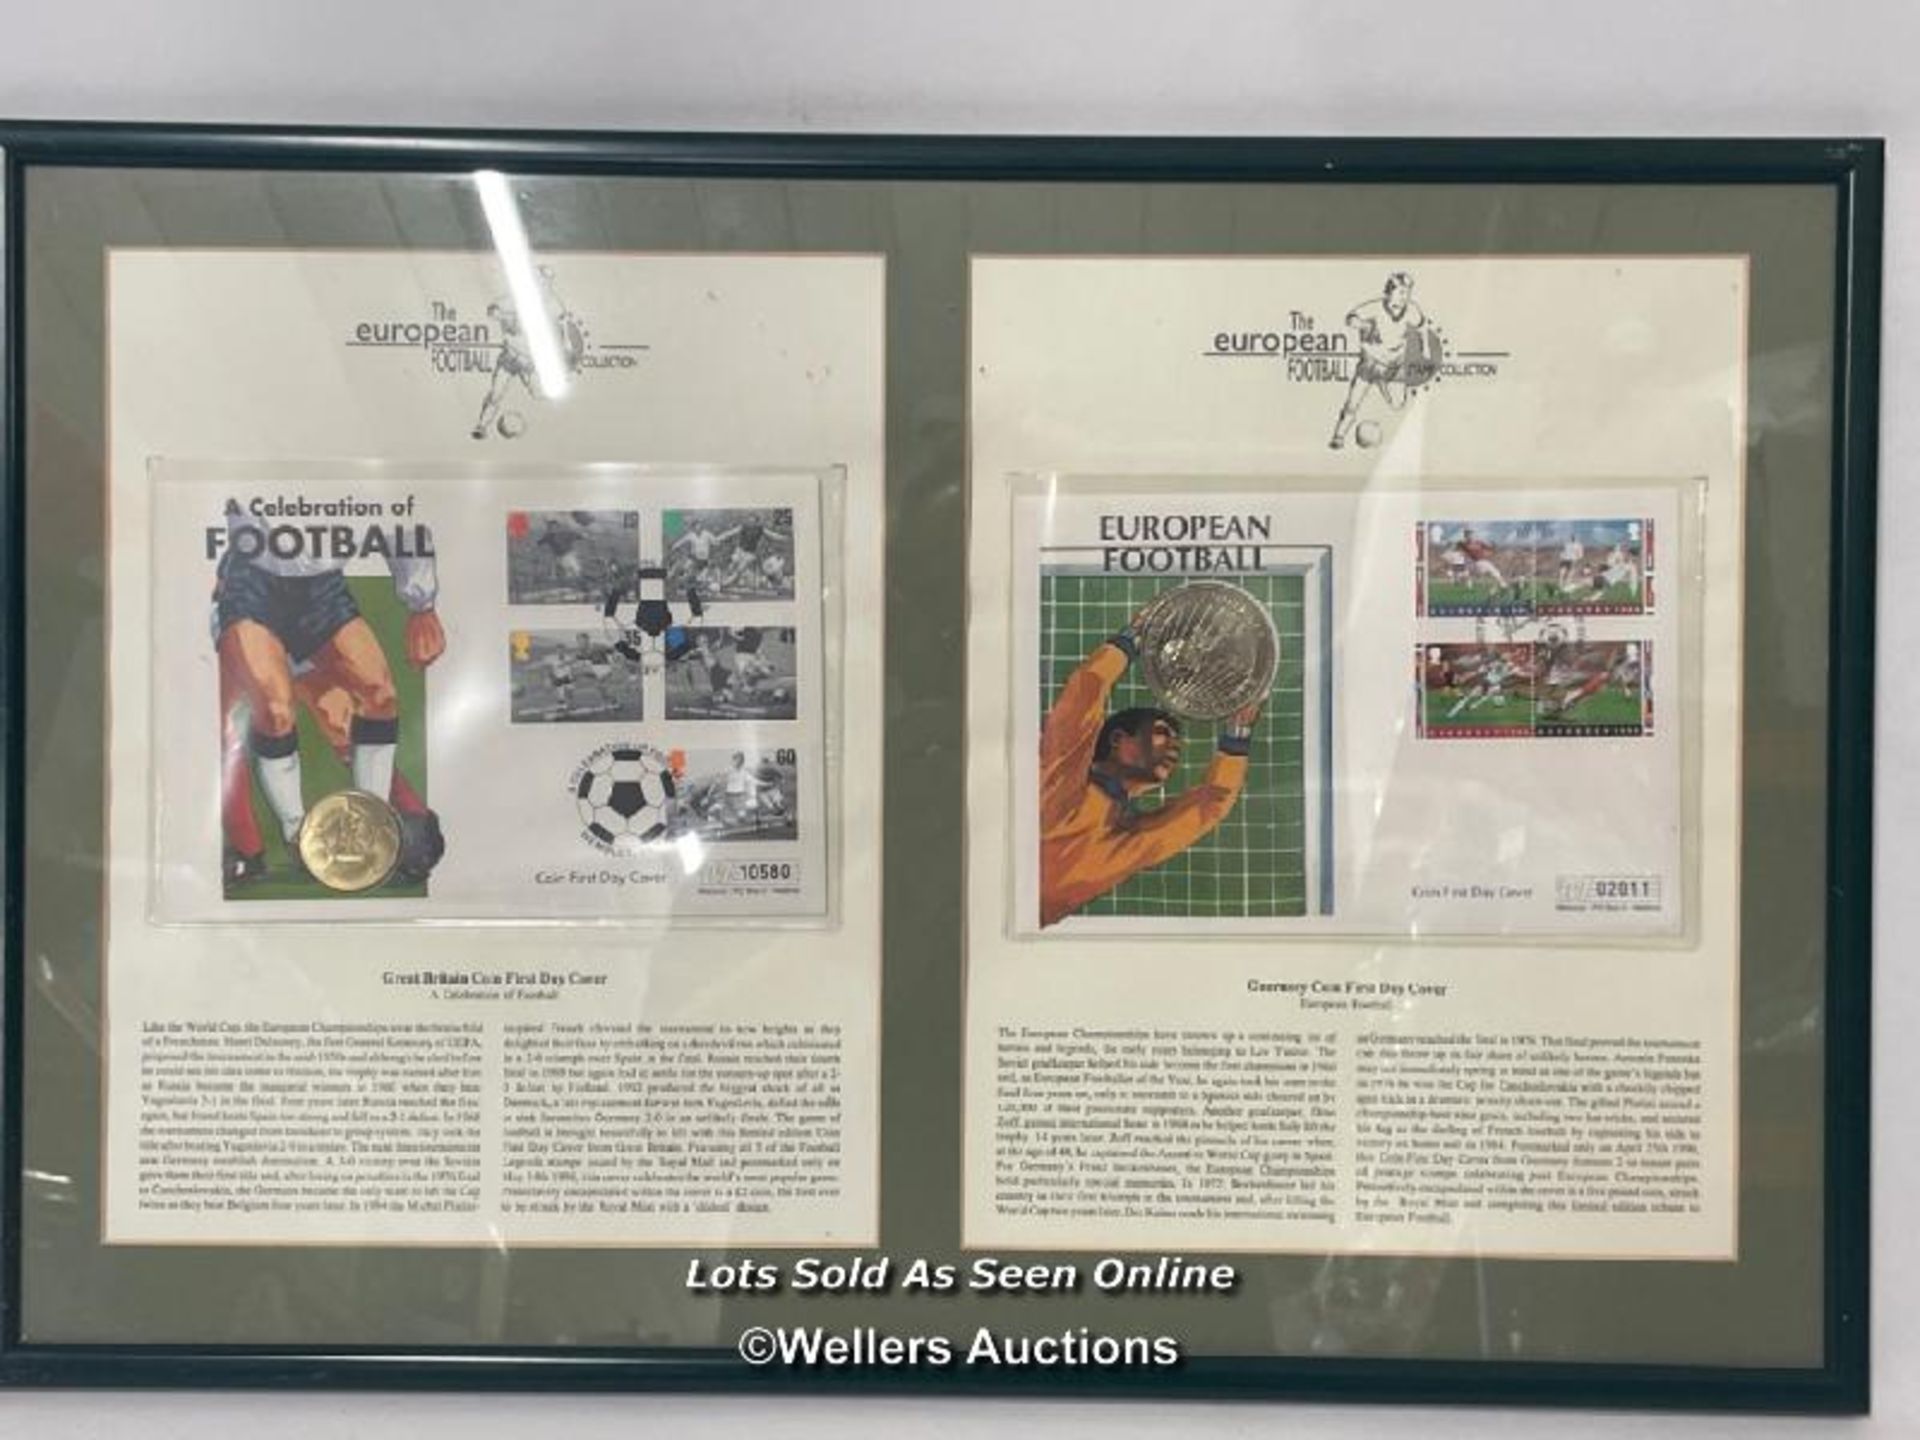 Framed European Football stamp collection 1st day covers with coins